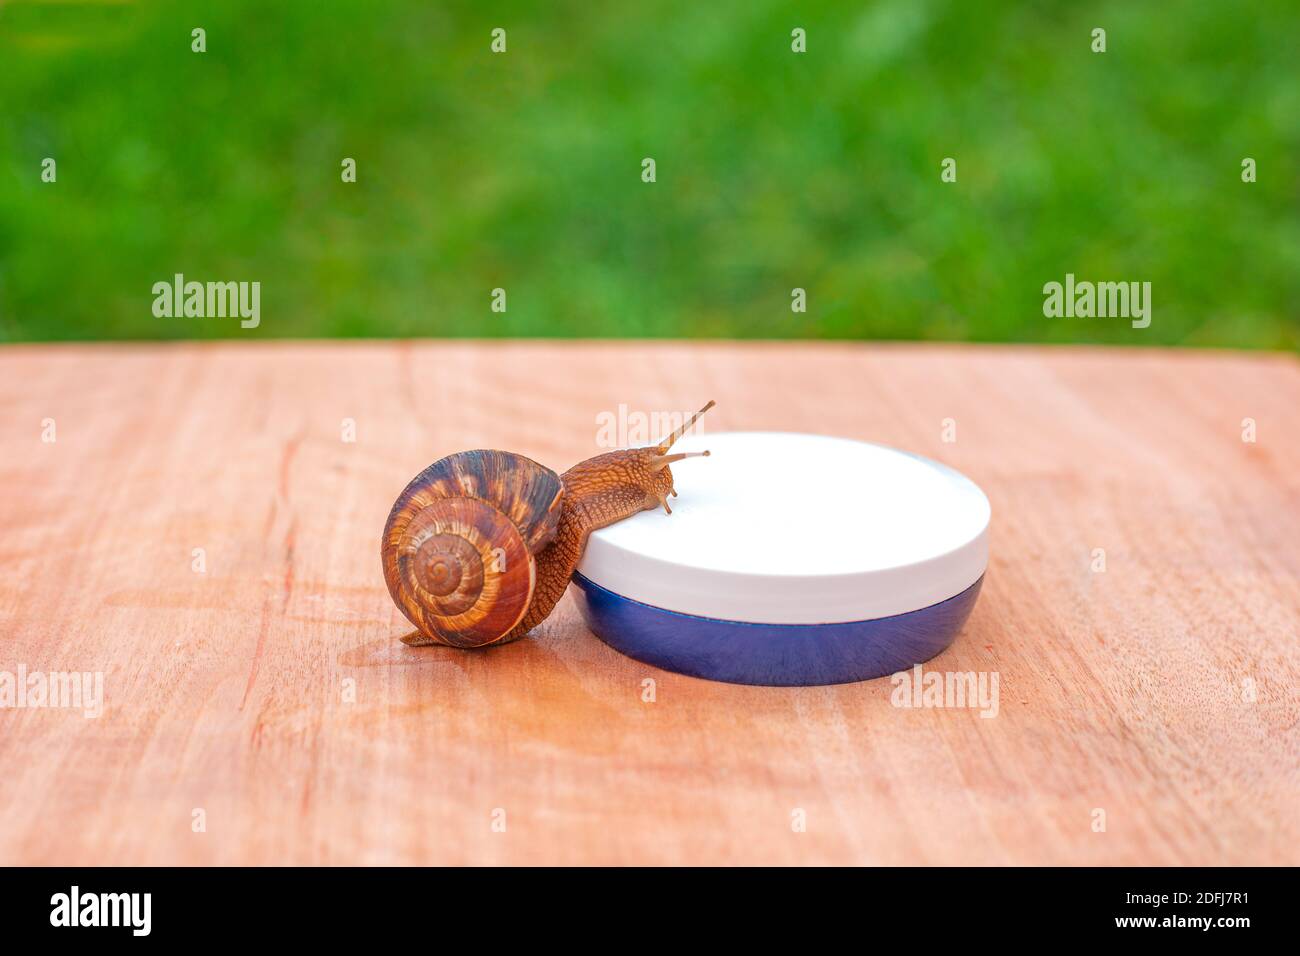 A snail crawls on a jar of face cream on a wooden surface against a background of green grass. Skin care concept. Stock Photo